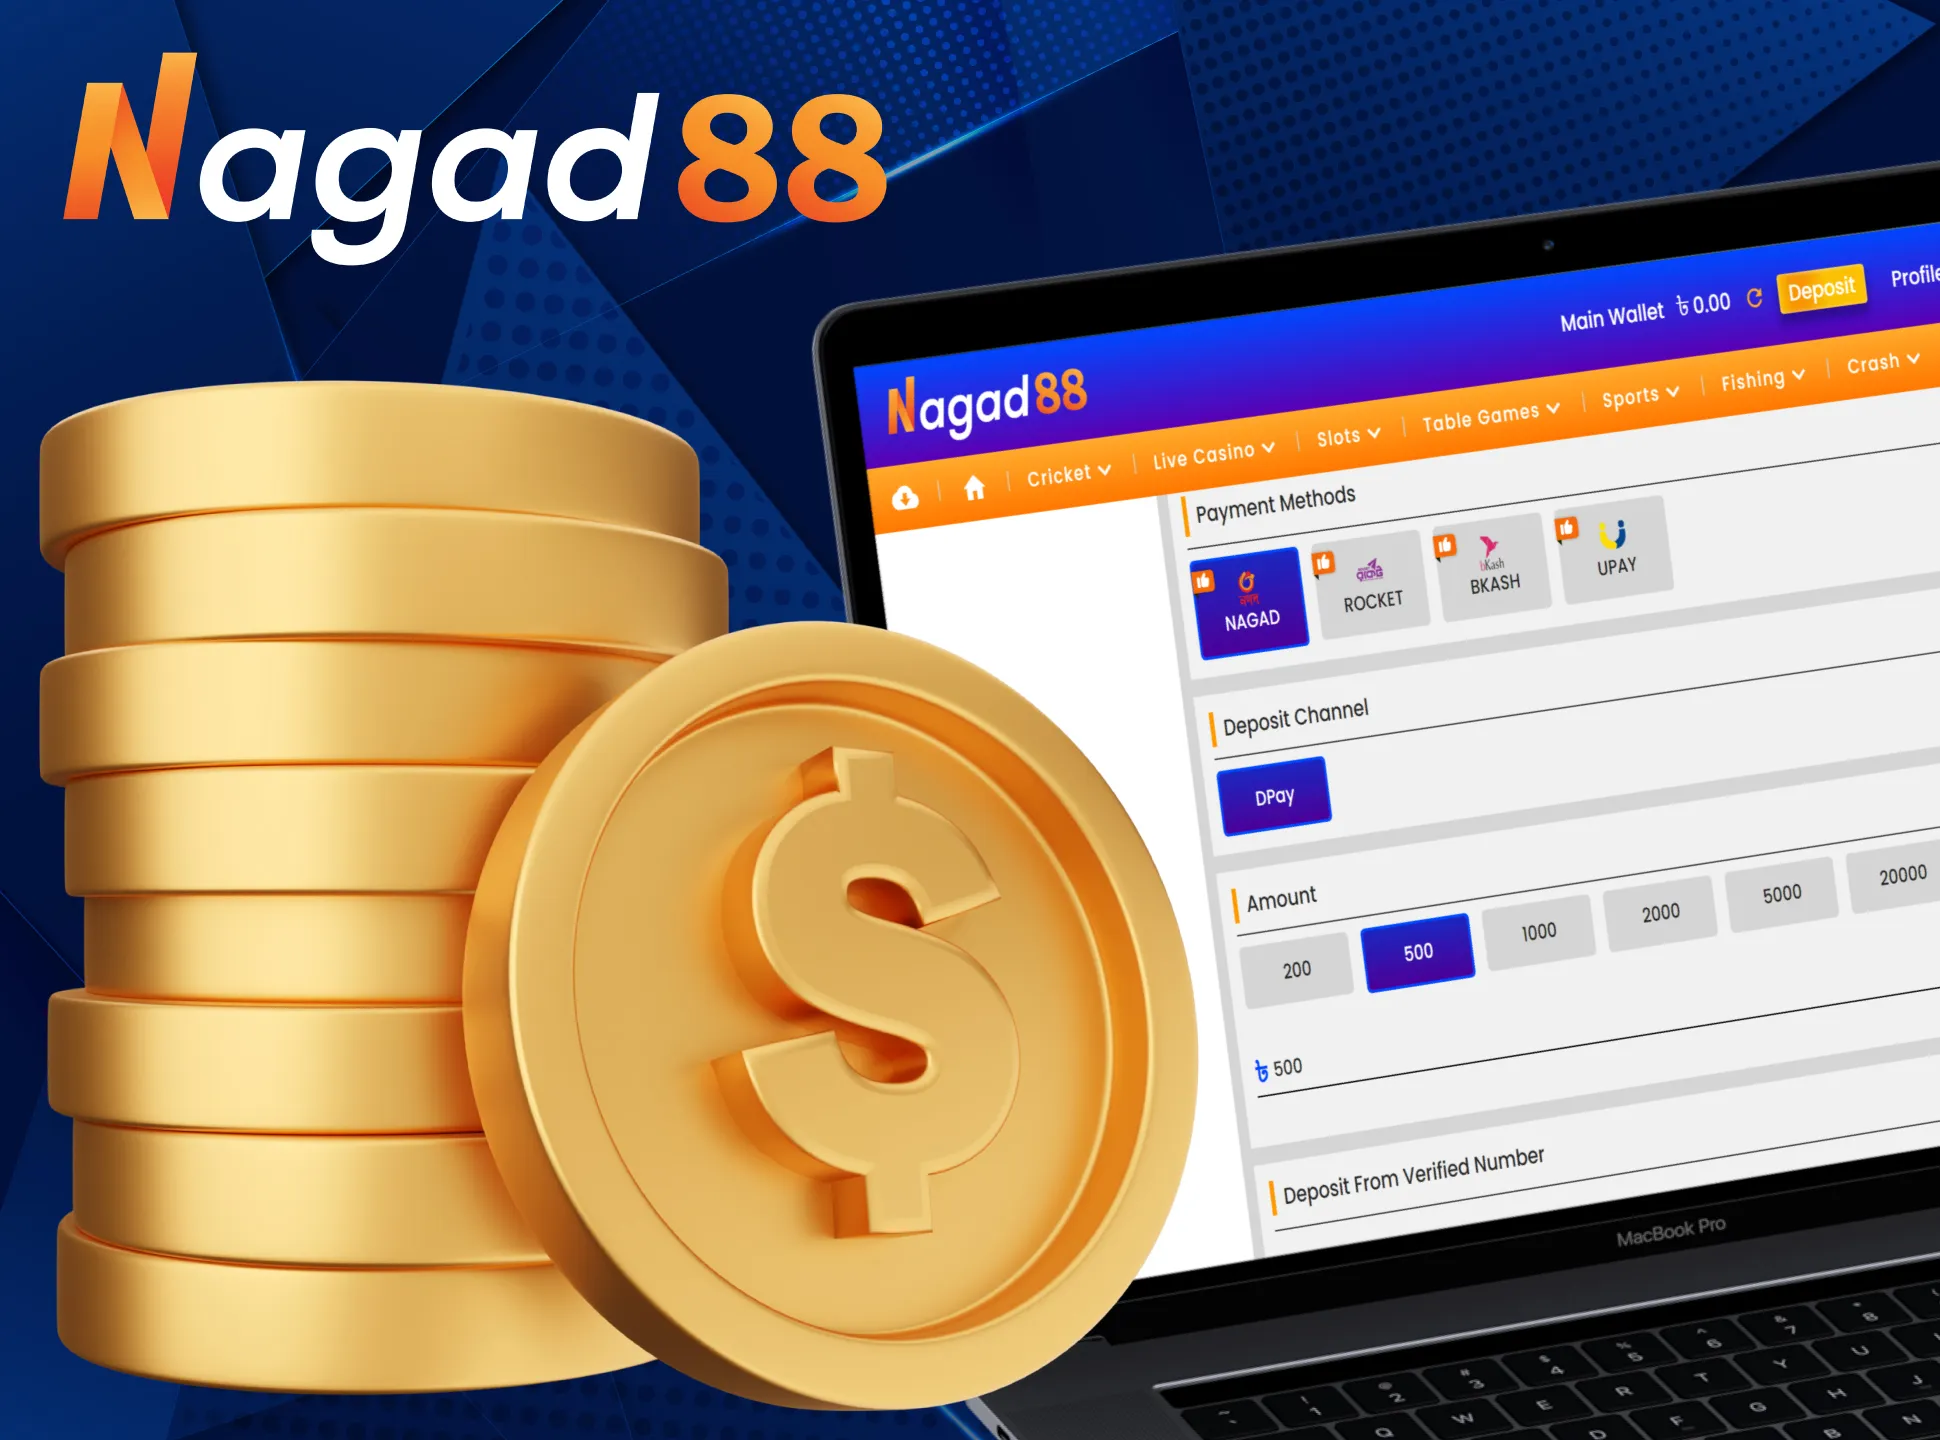 Fill in the payment details in Nagad88 payment systems.